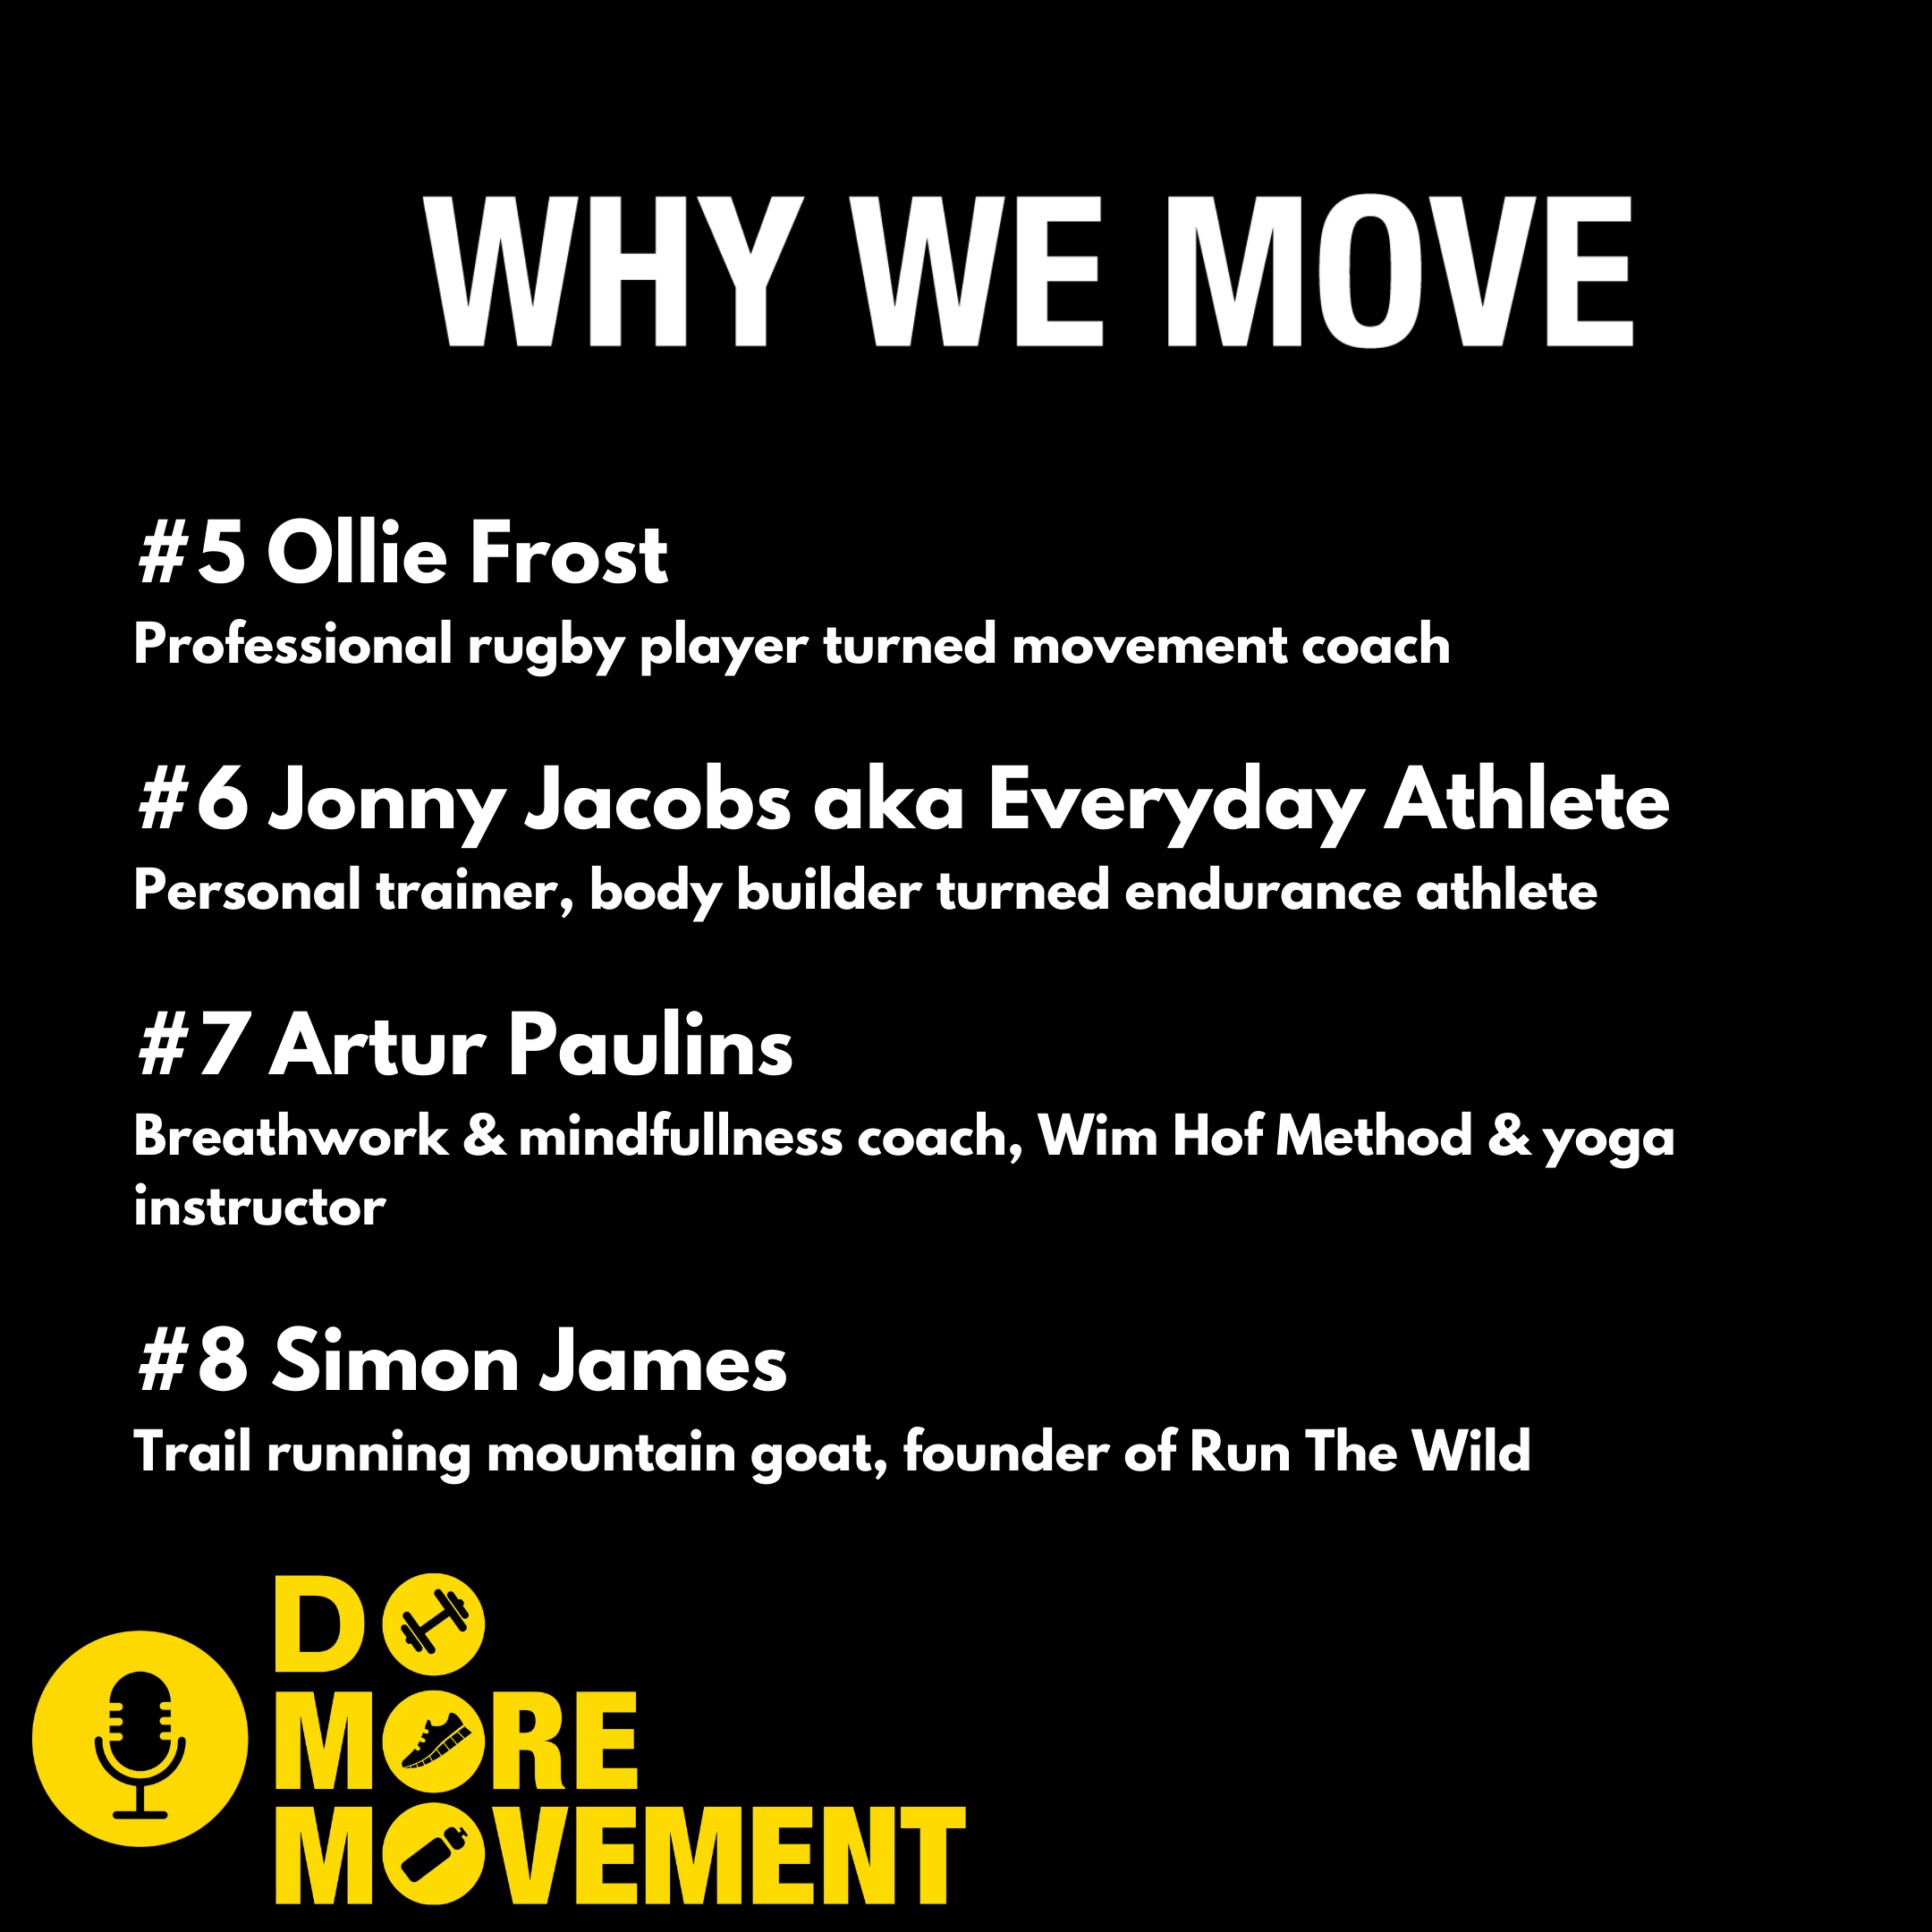 Why We Move S2 #5-8 running order.png